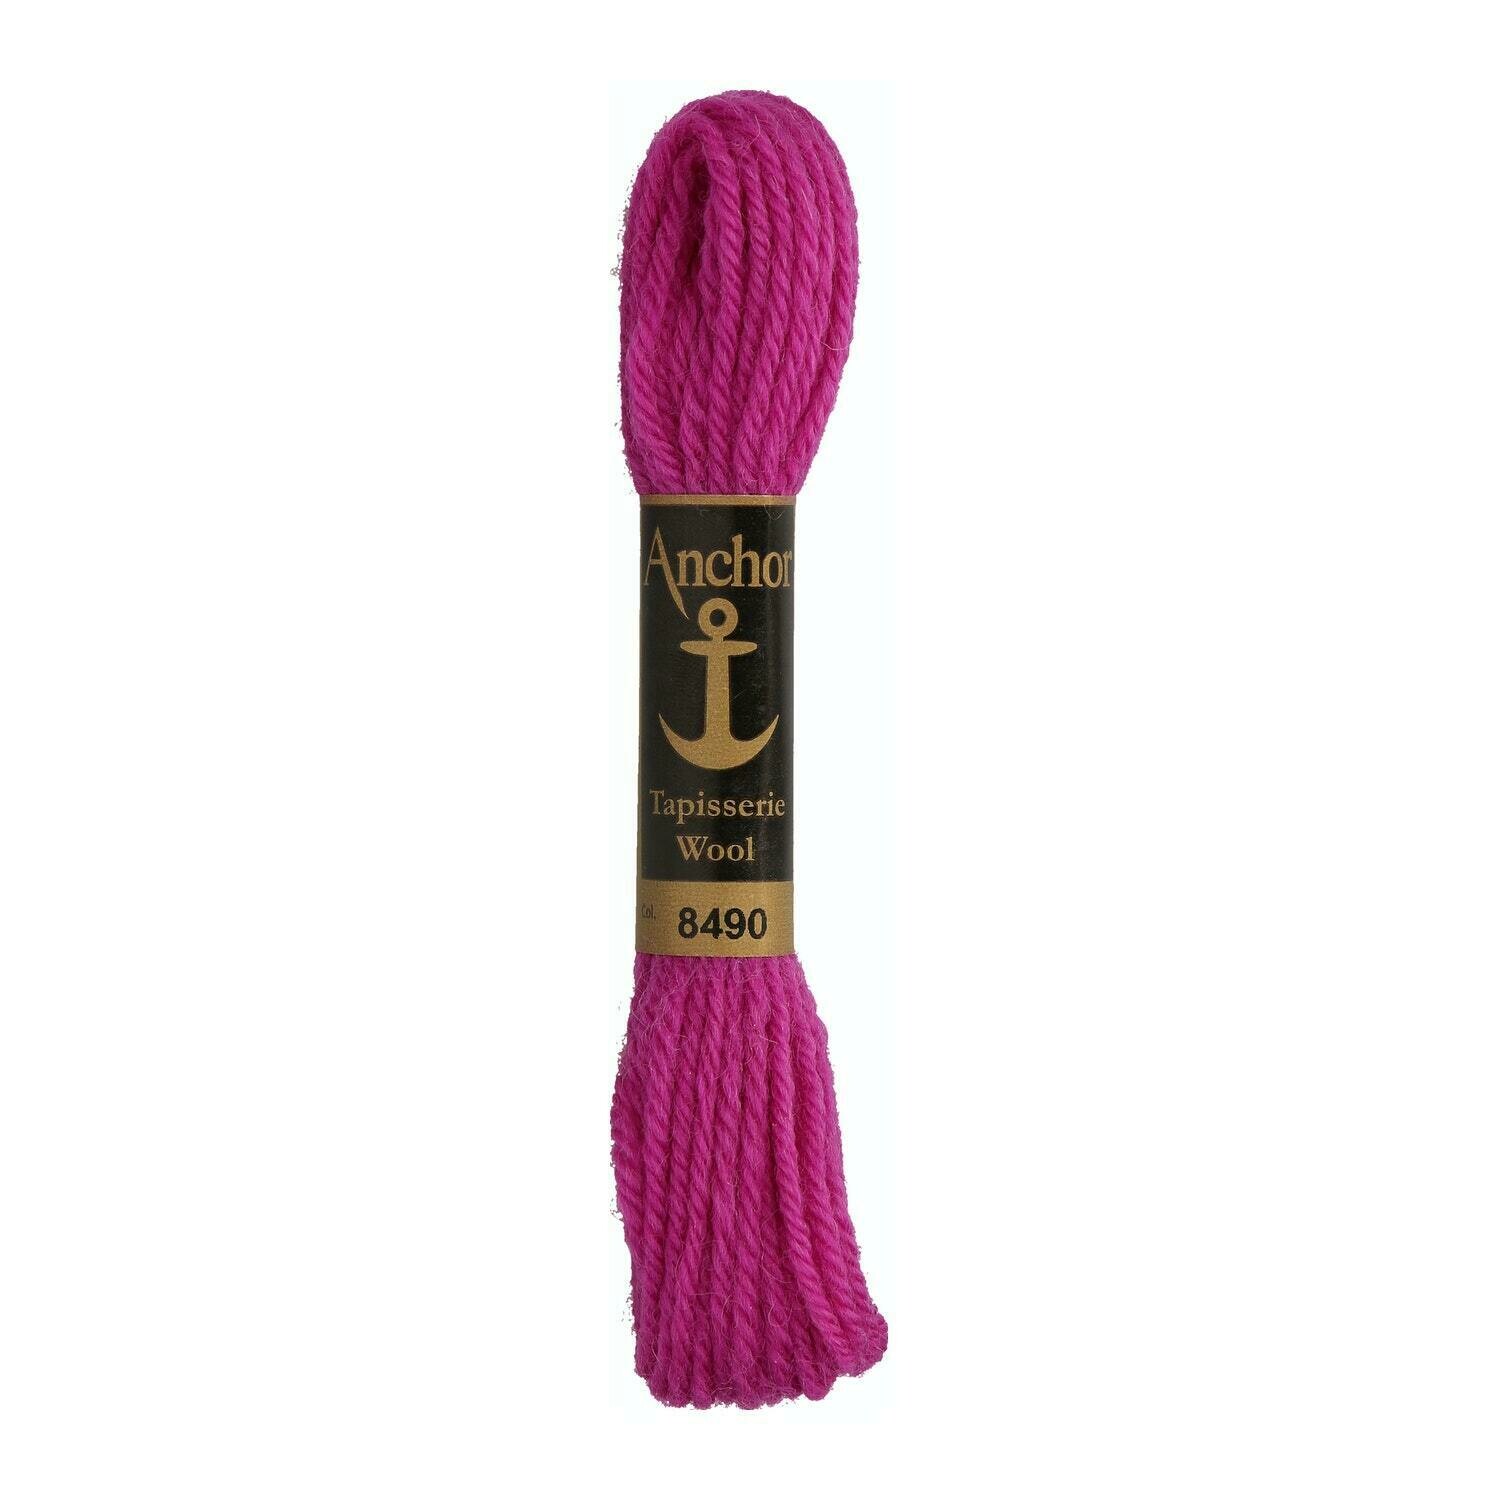 Anchor Tapisserie Wool #08490